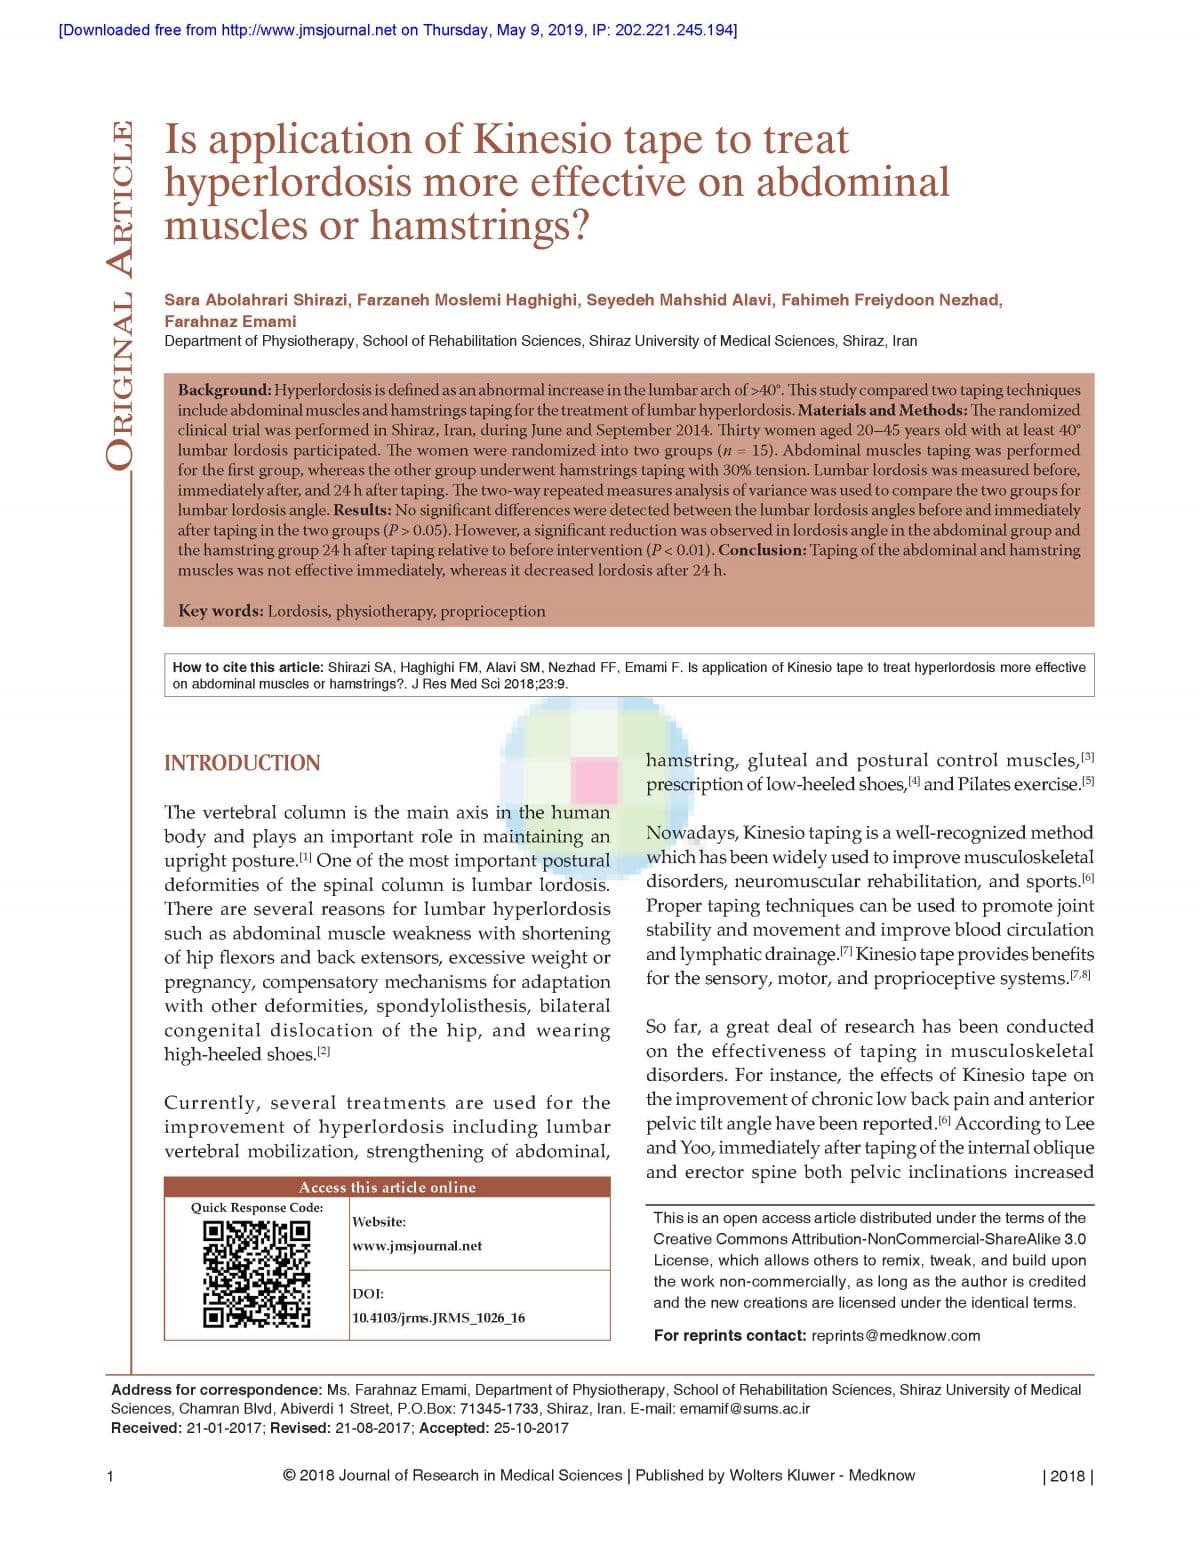 Research Article - Is application of Kinesio tape to treat hyperlordosis more effective on abdominal muscles or hamstrings?